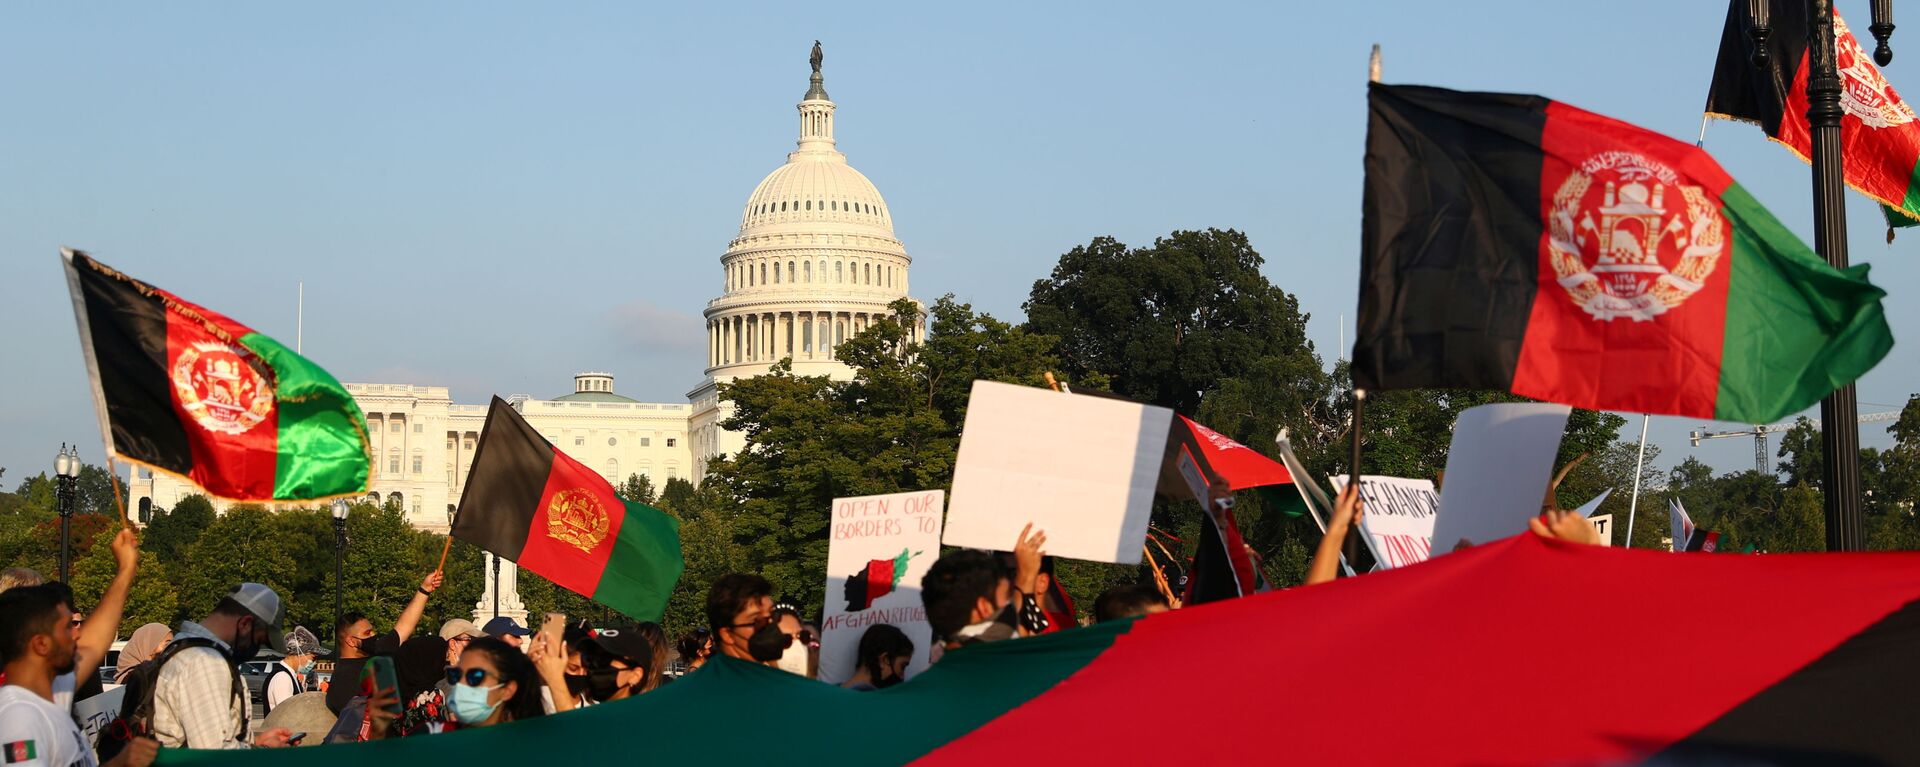 Protesters holding Afghanistan flags take part in a demonstration challenging the transparency of the evacuation process from Kabul Airport, near the U.S. Capitol, in Washington, U.S., August 28, 2021. REUTERS/Tom Brenner - Sputnik International, 1920, 31.08.2021